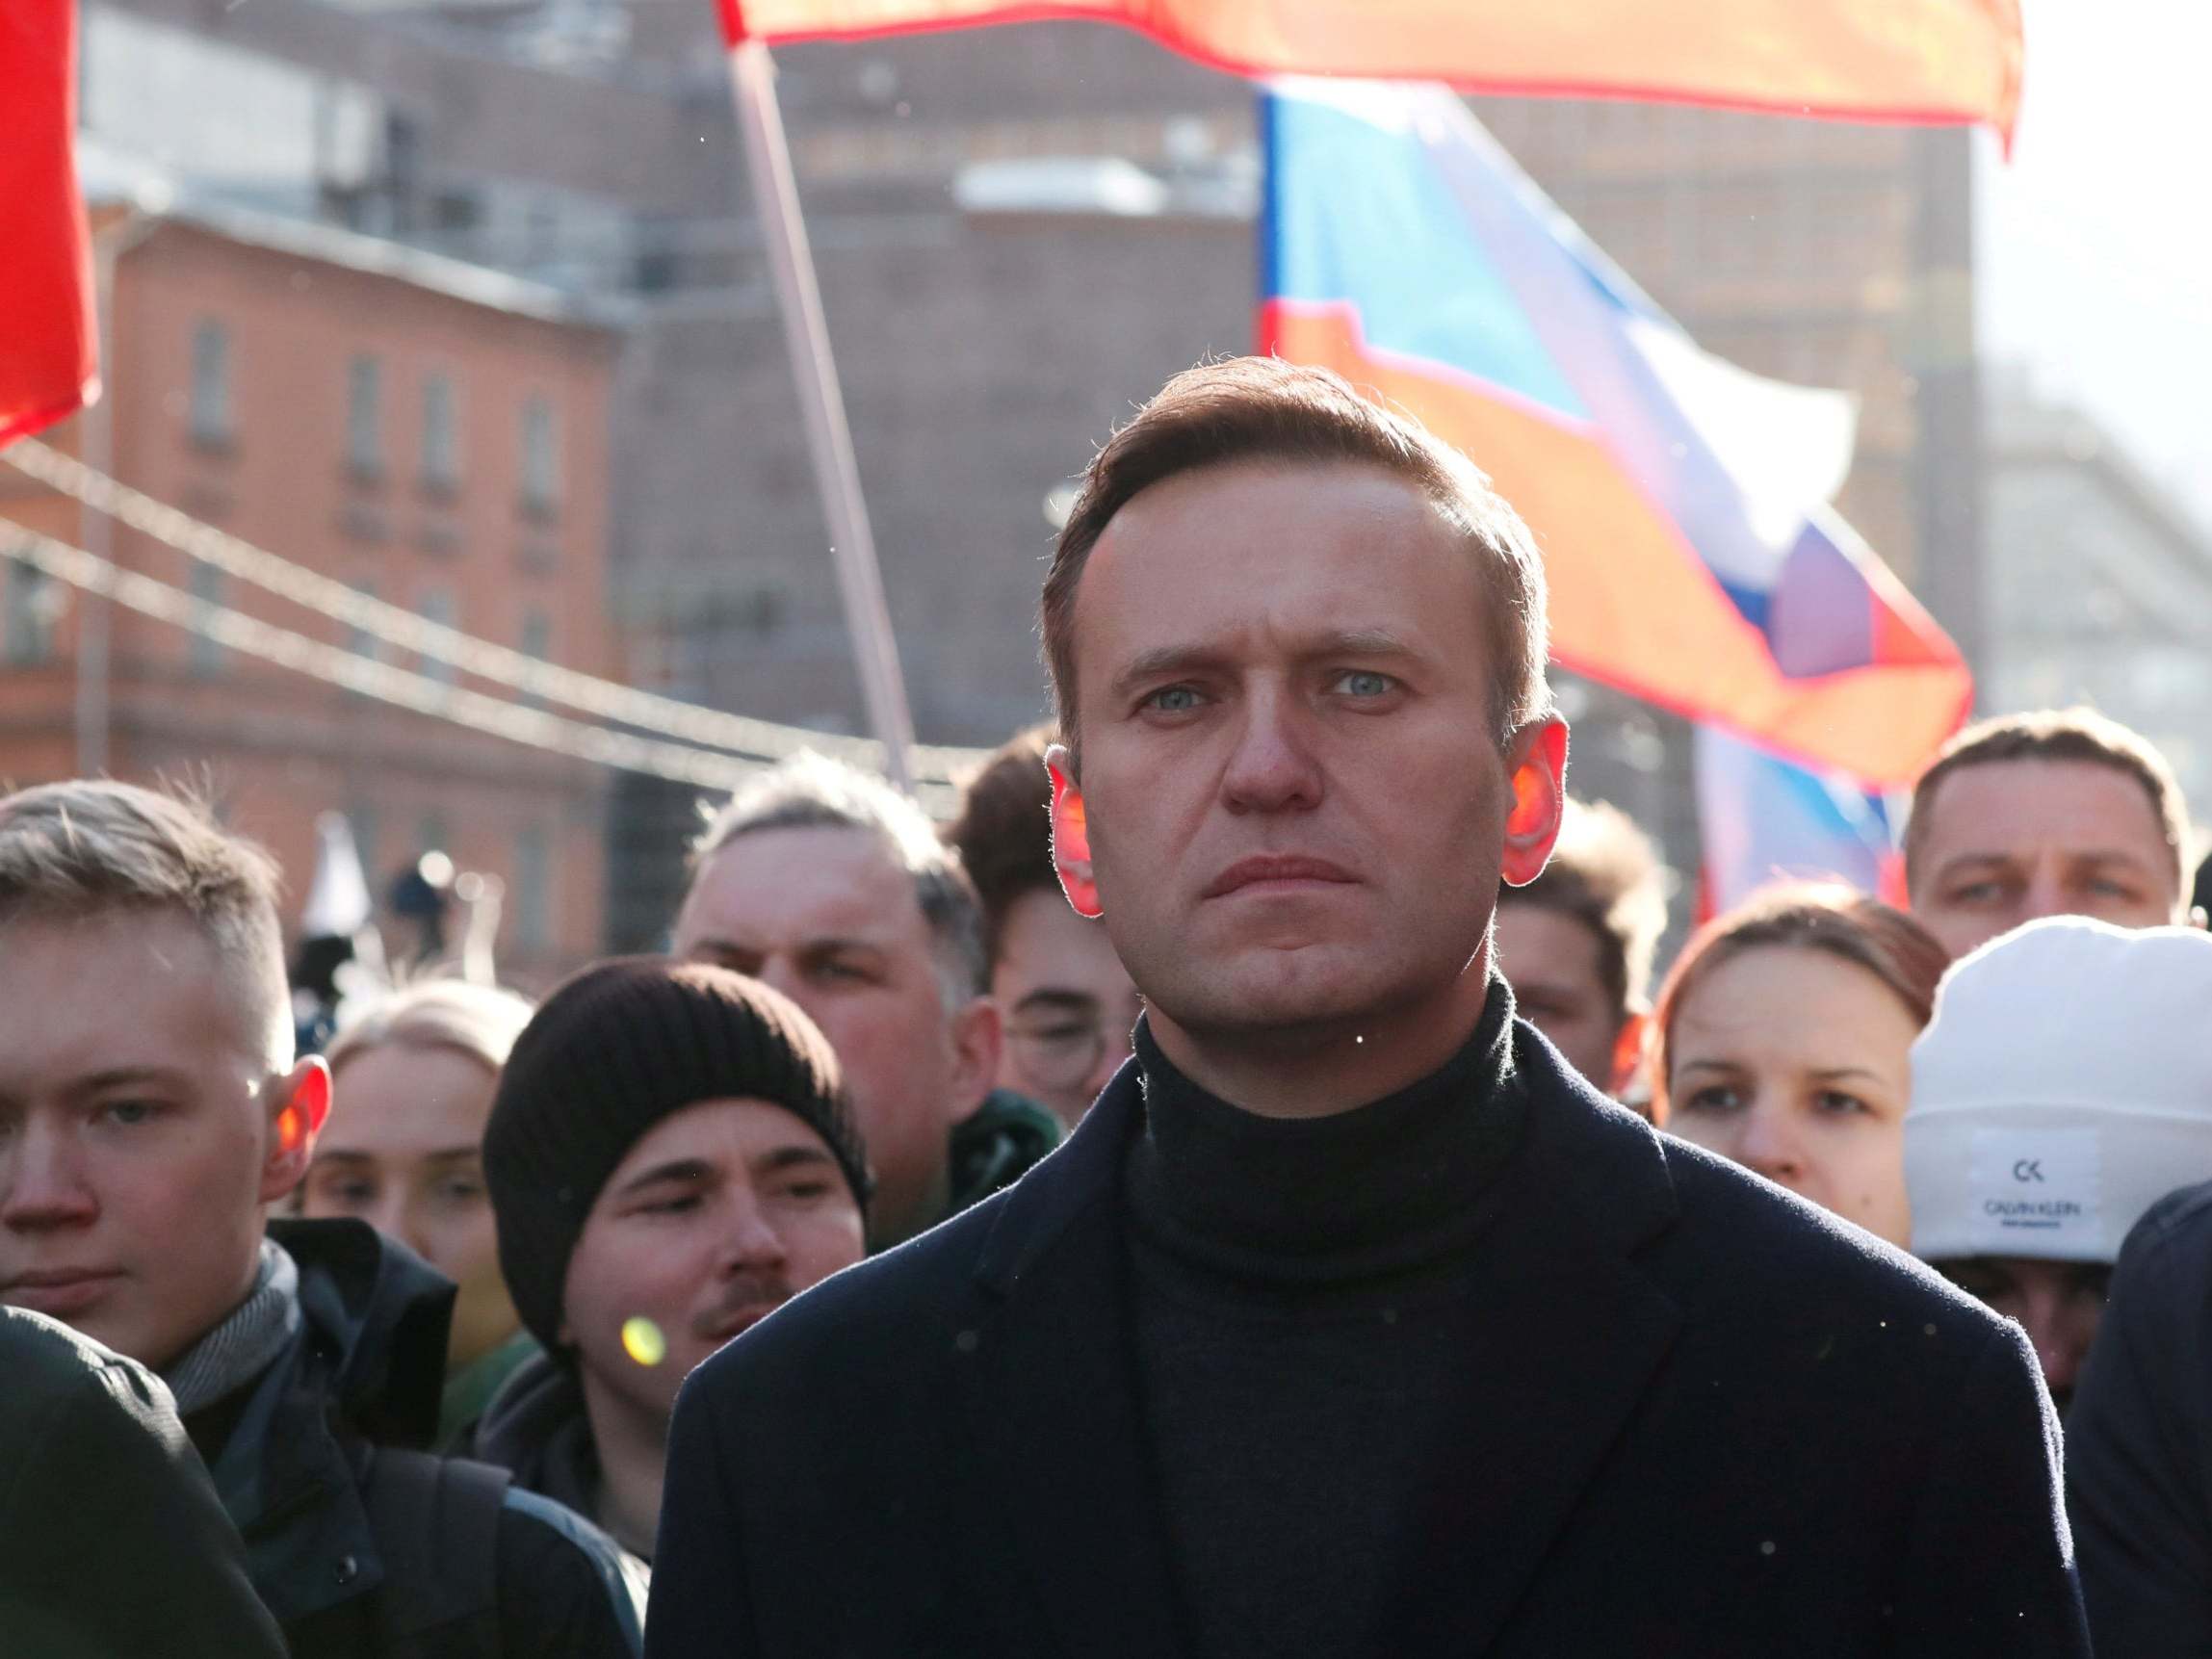 Related video: Russian opposition leader Alexei Navalny airlifted to Germany